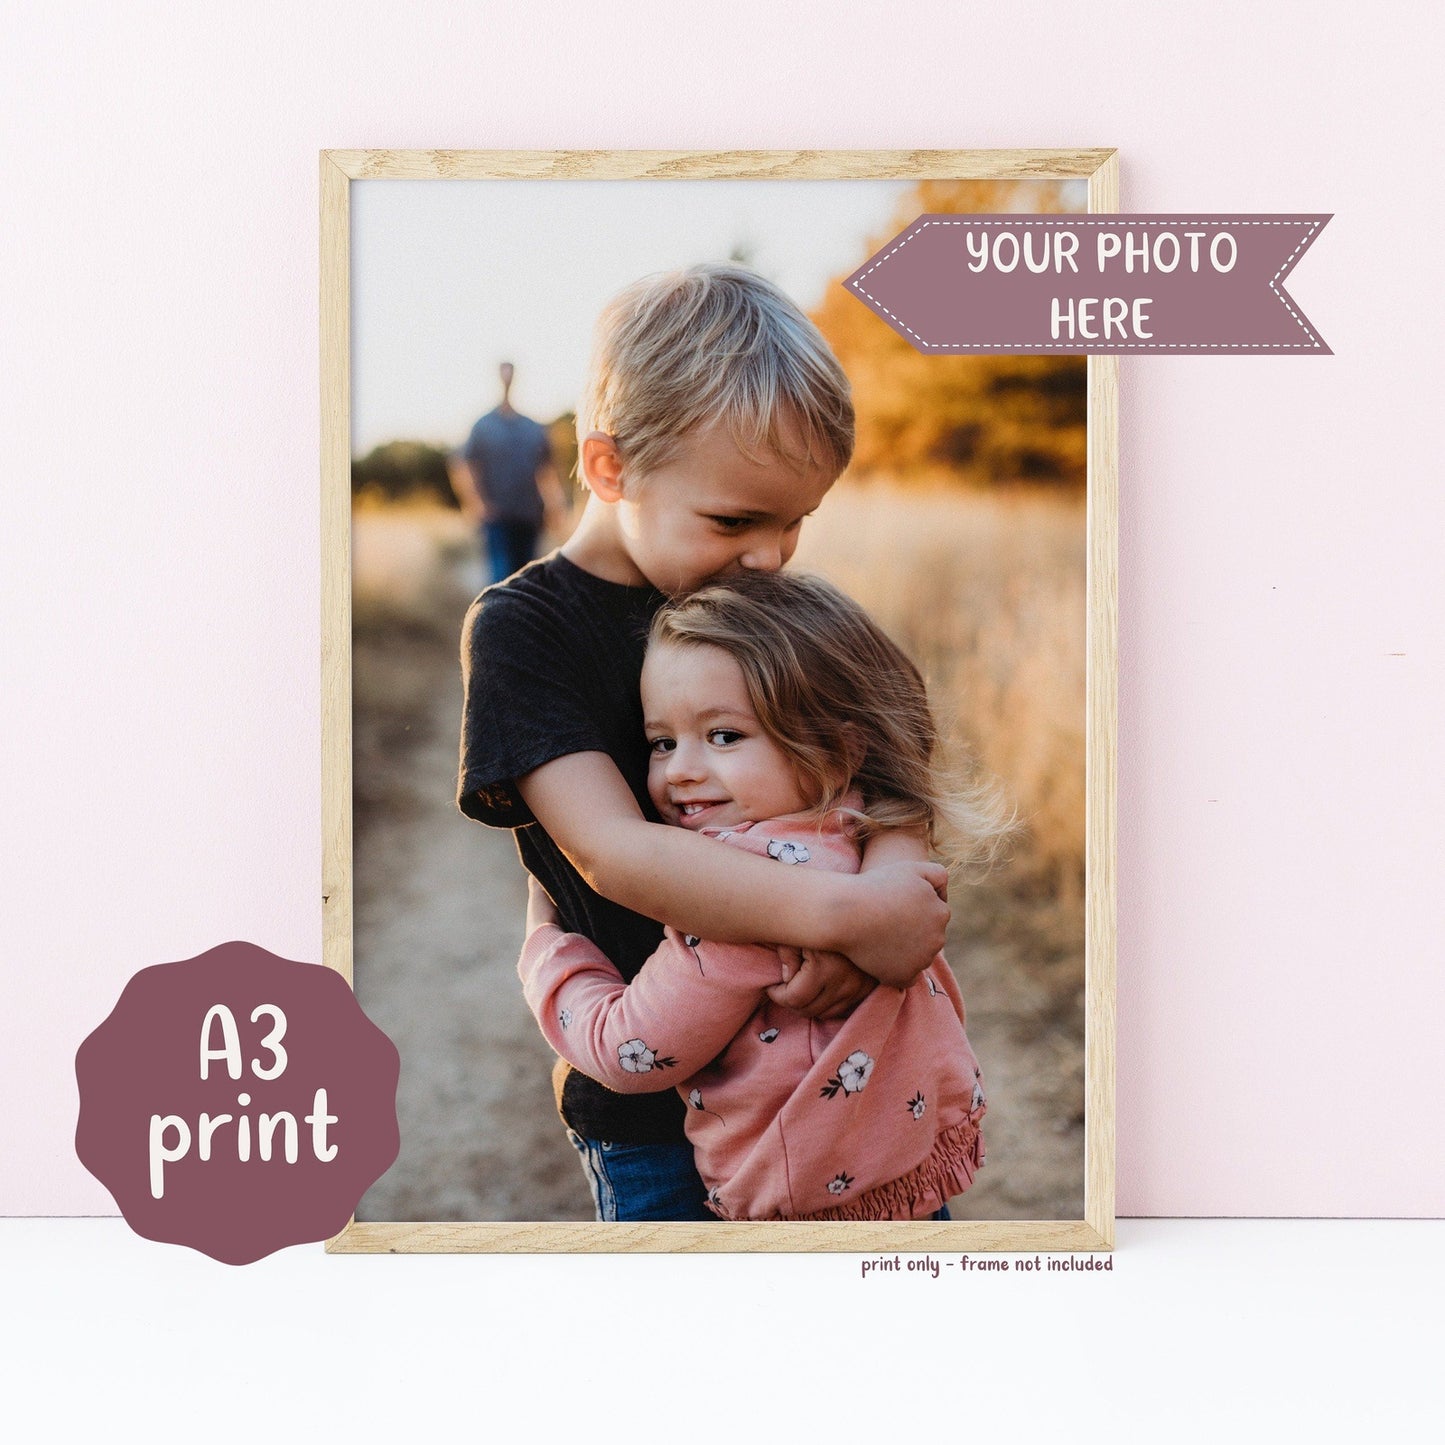 Print Your Own Pet Photo